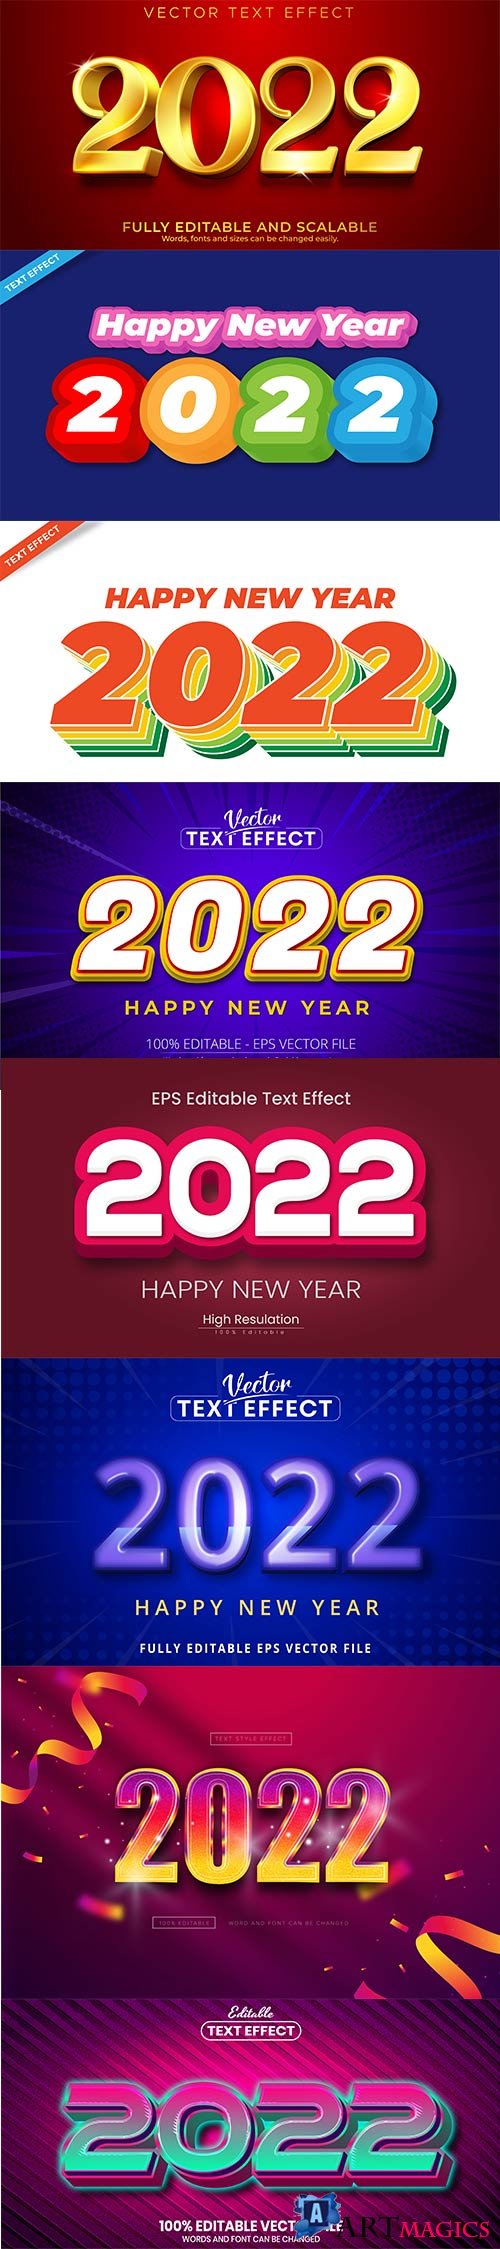 2022 New year and christmas editable text effect vector vol 36